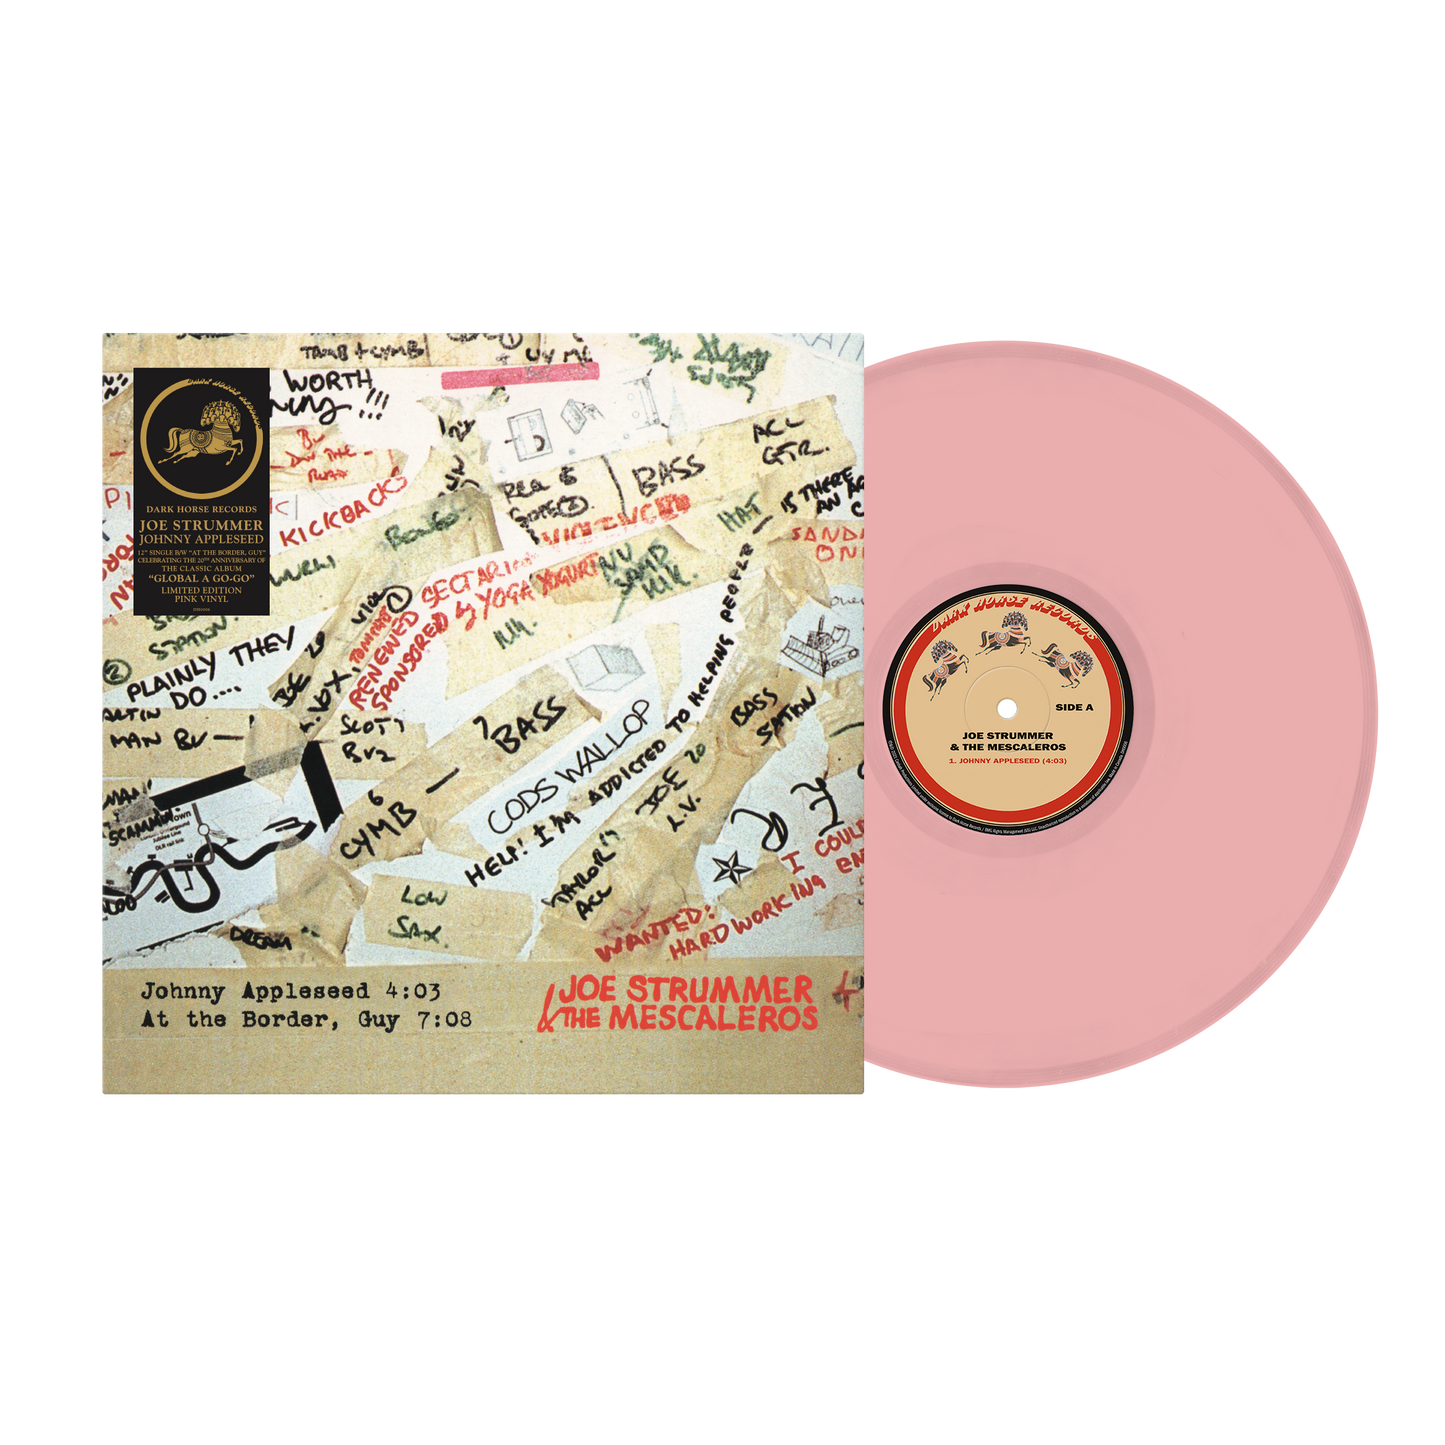 Johnny Appleseed Limited 12" Pink Vinyl